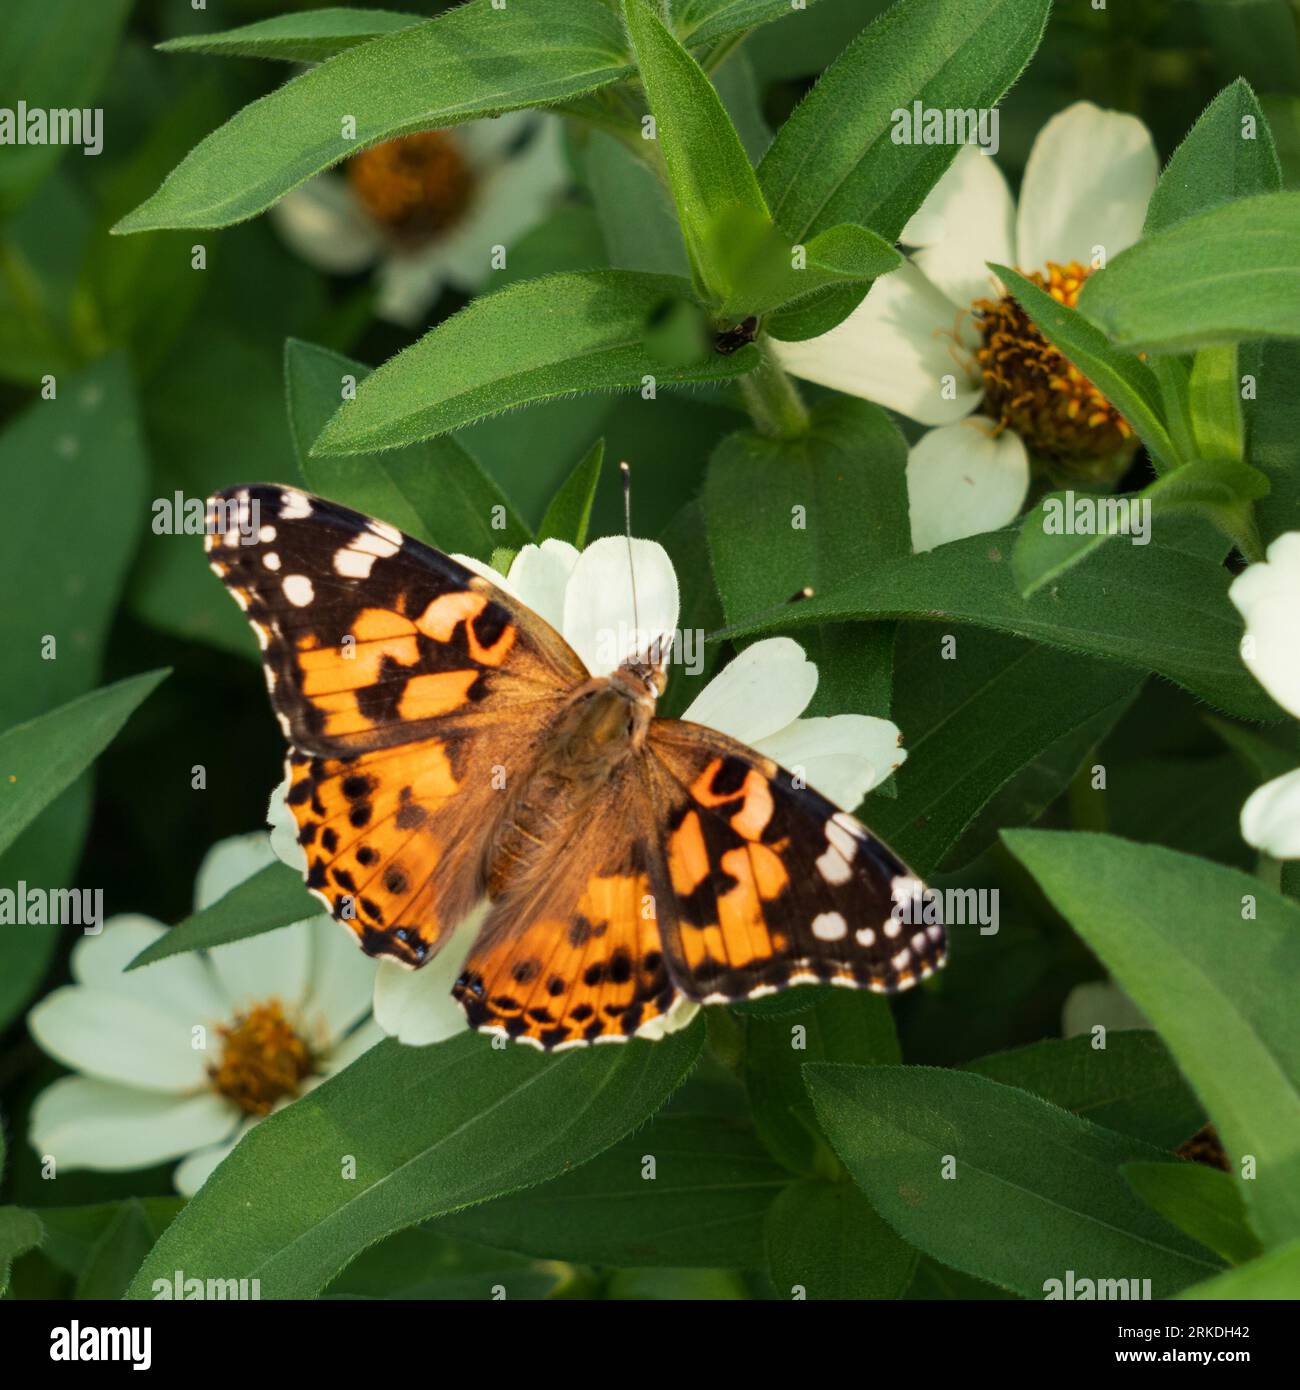 The Painted Lady butterfly feeding on flowers in the Parkview Gardens, Winkler, Manitoba, Canada. Stock Photo